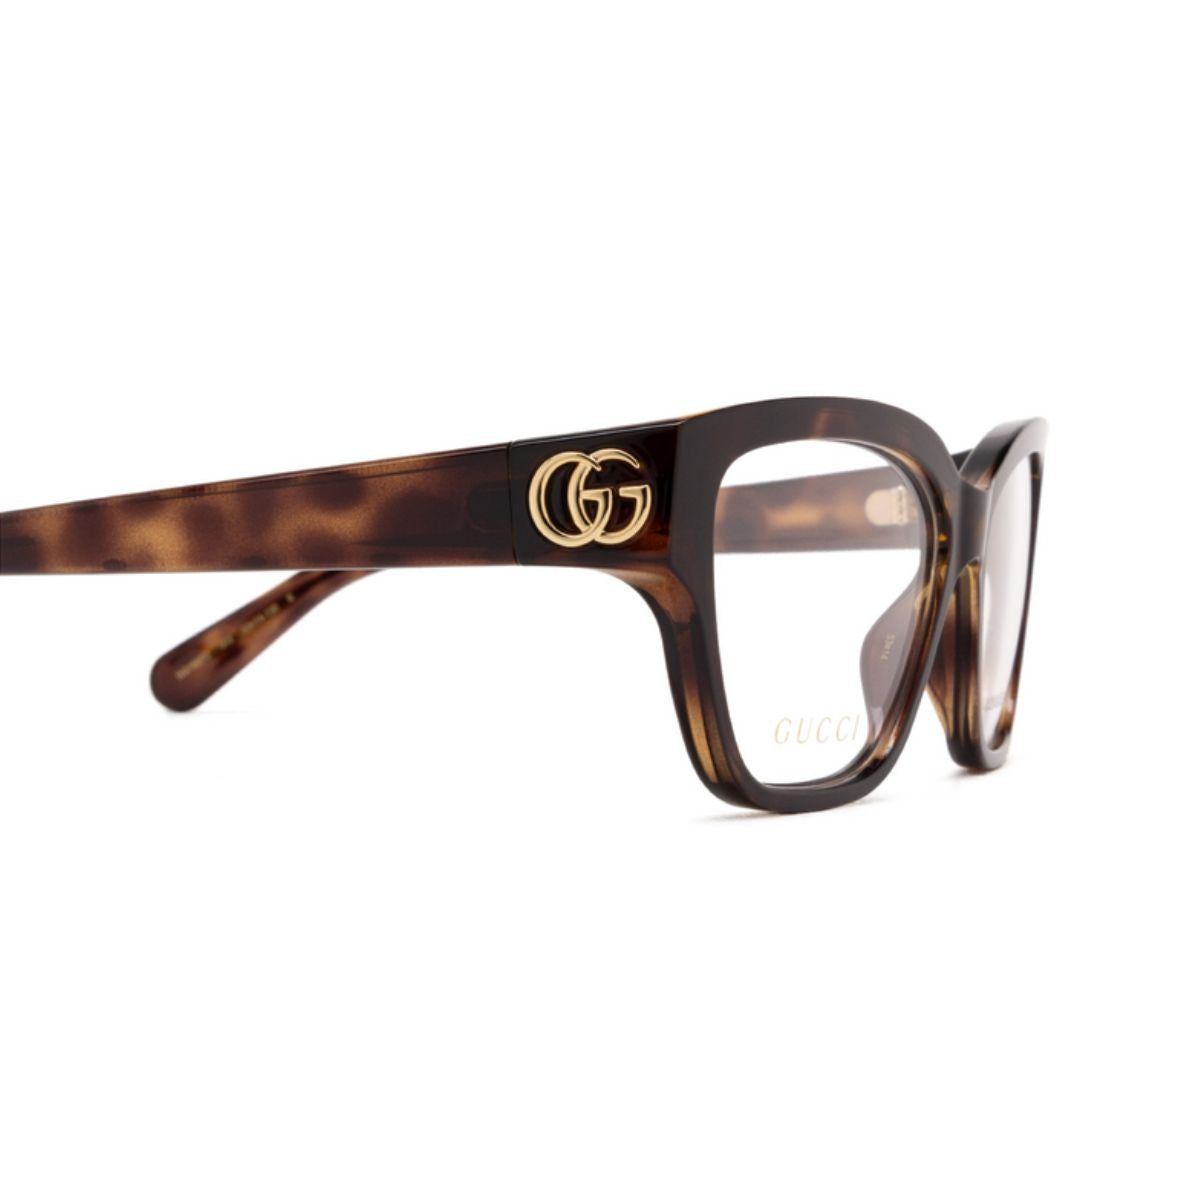 "Get Your Gucci GG1597O 002 Frames for Women Here"